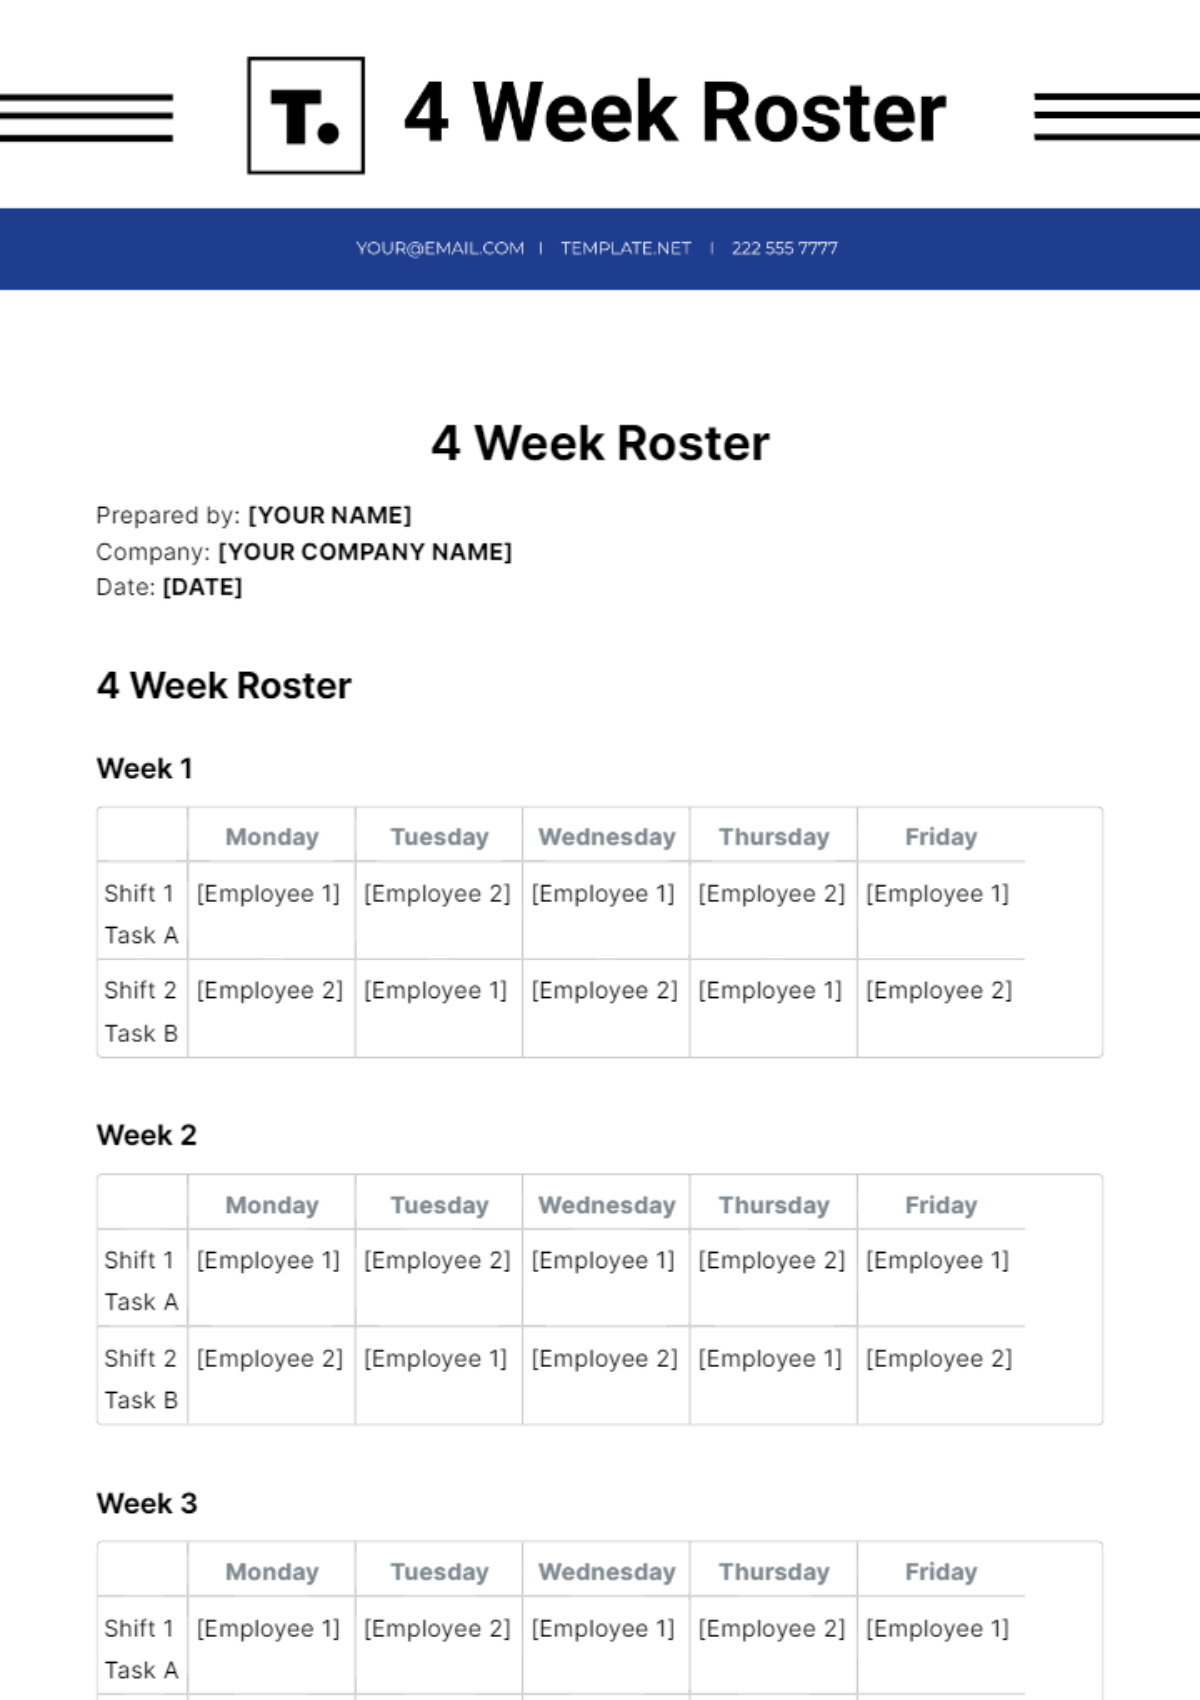 Free 4 Week Roster Template